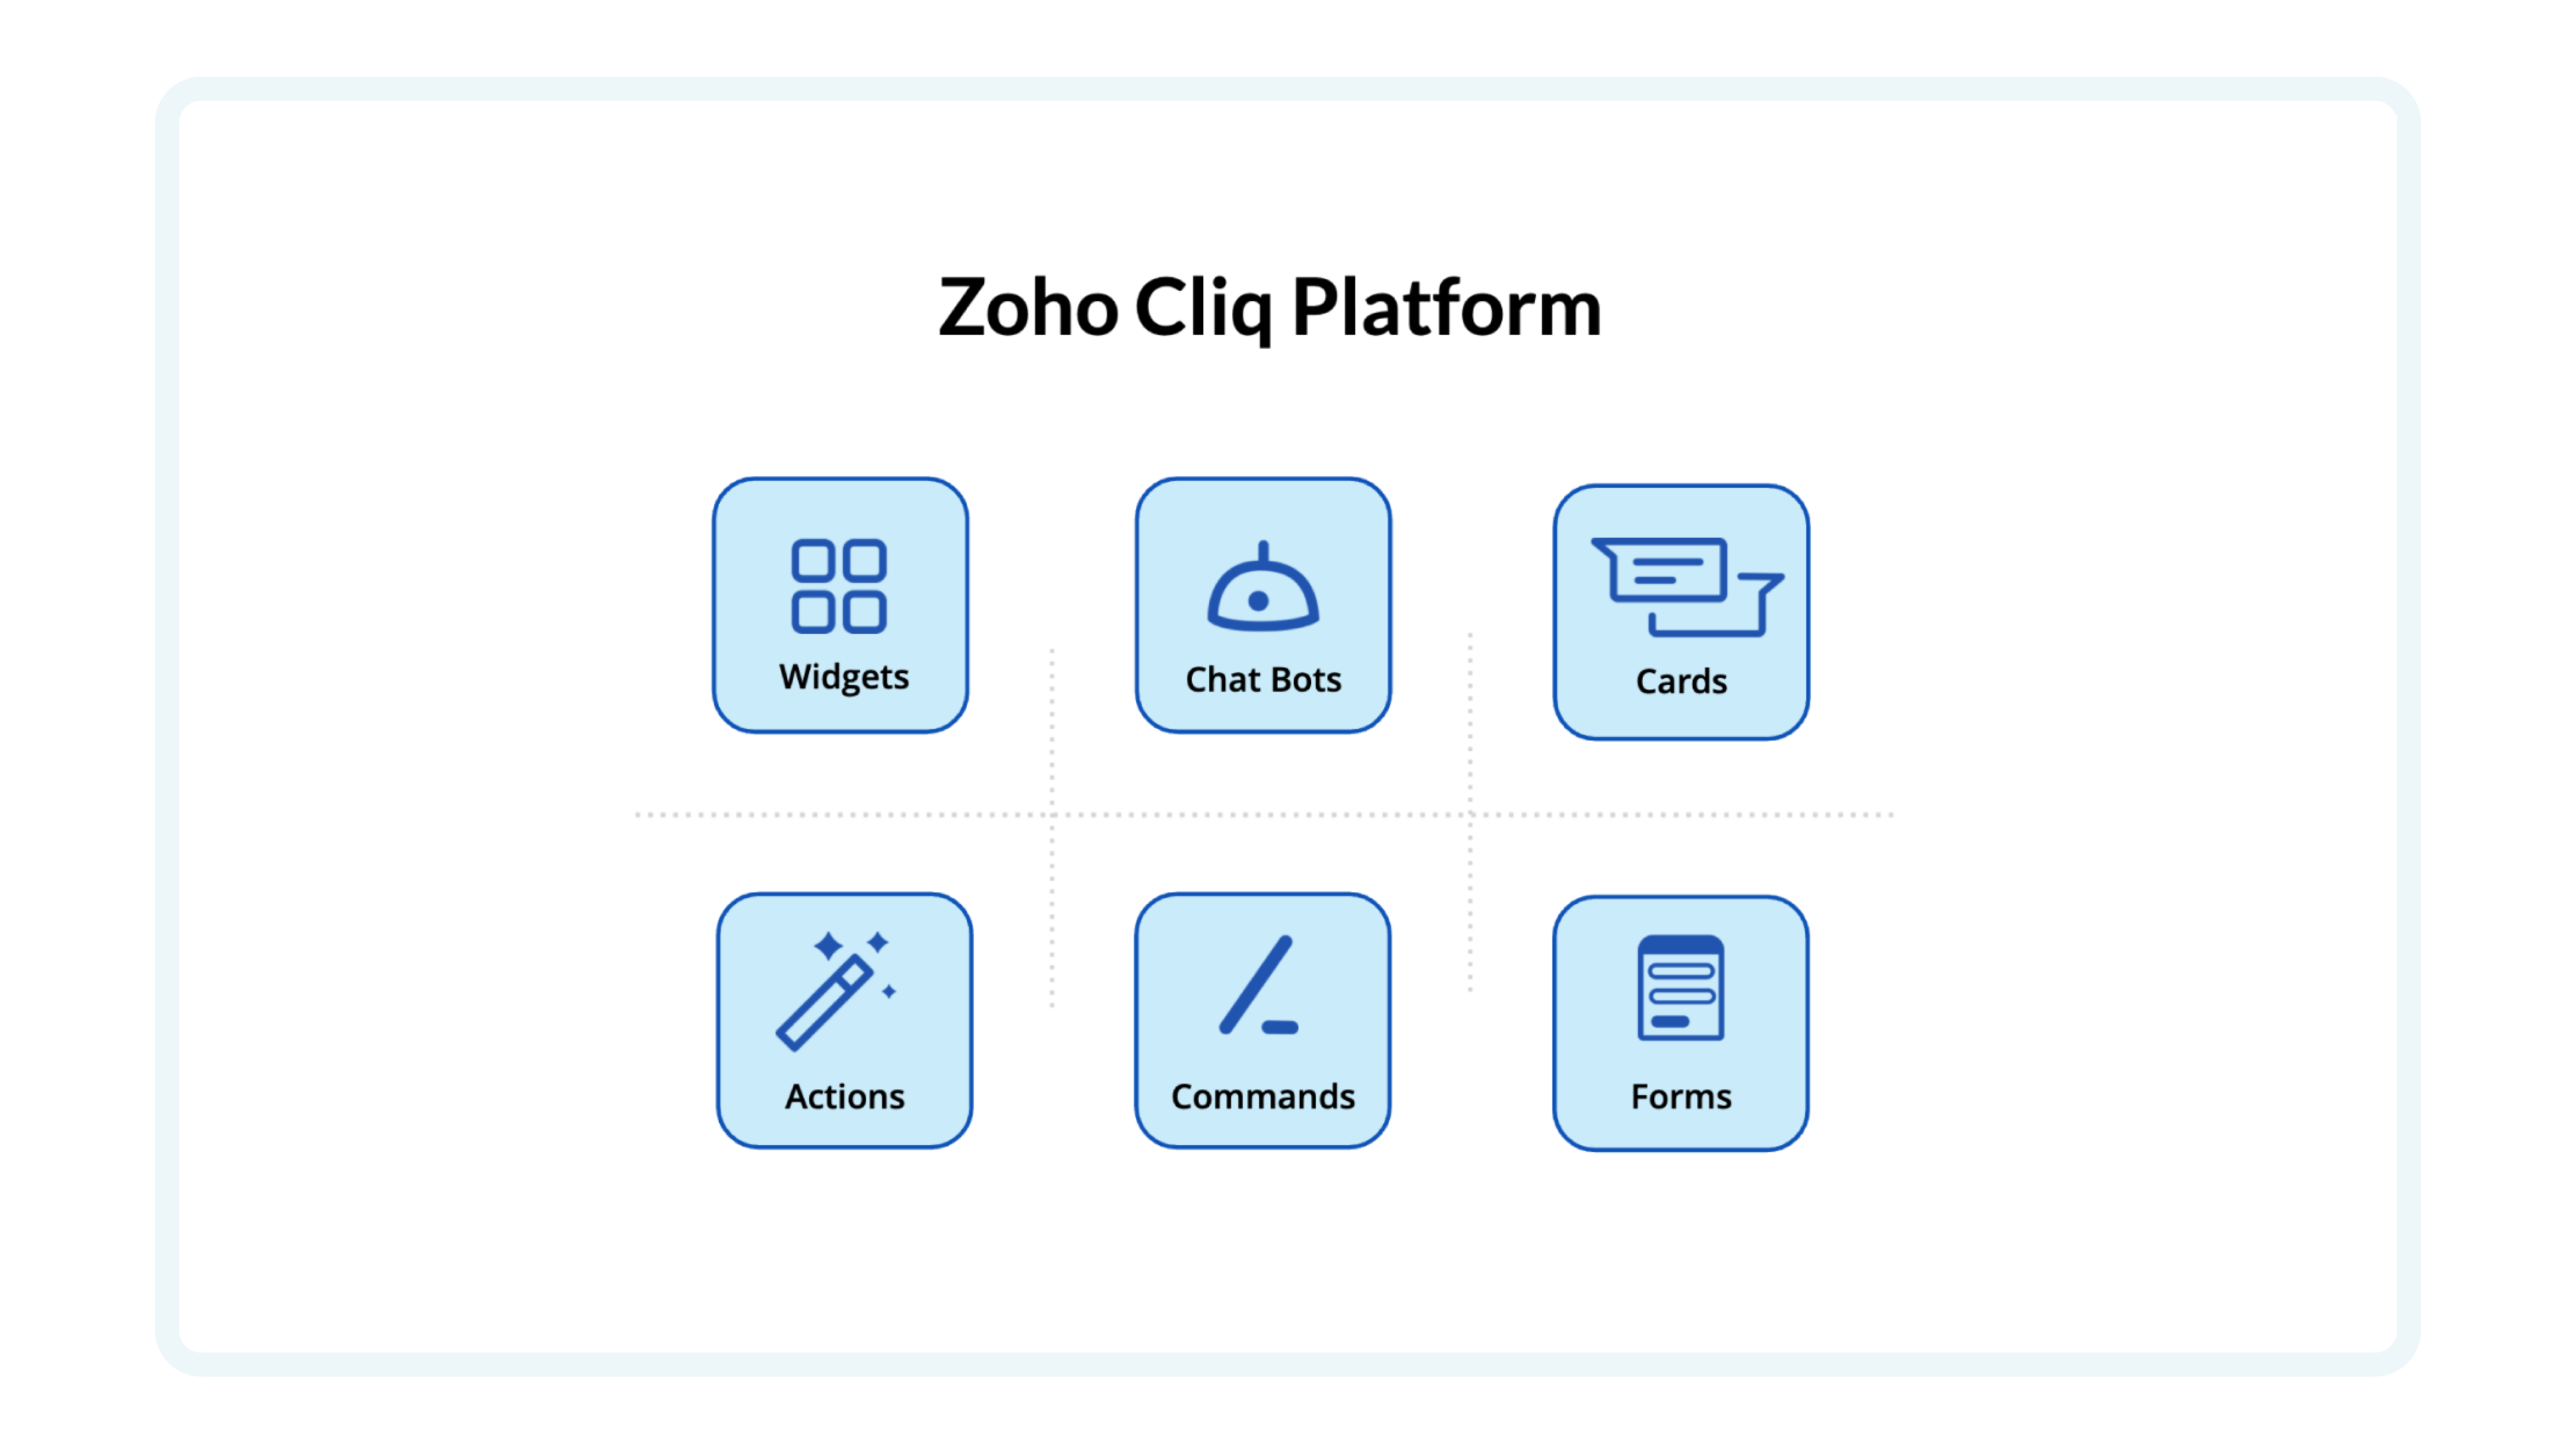 You can use the Zoho Cliq Platform to build internal tools like Bots, Commands, Message actions, and others to automate your routine activities and bring data from other apps into Cliq.